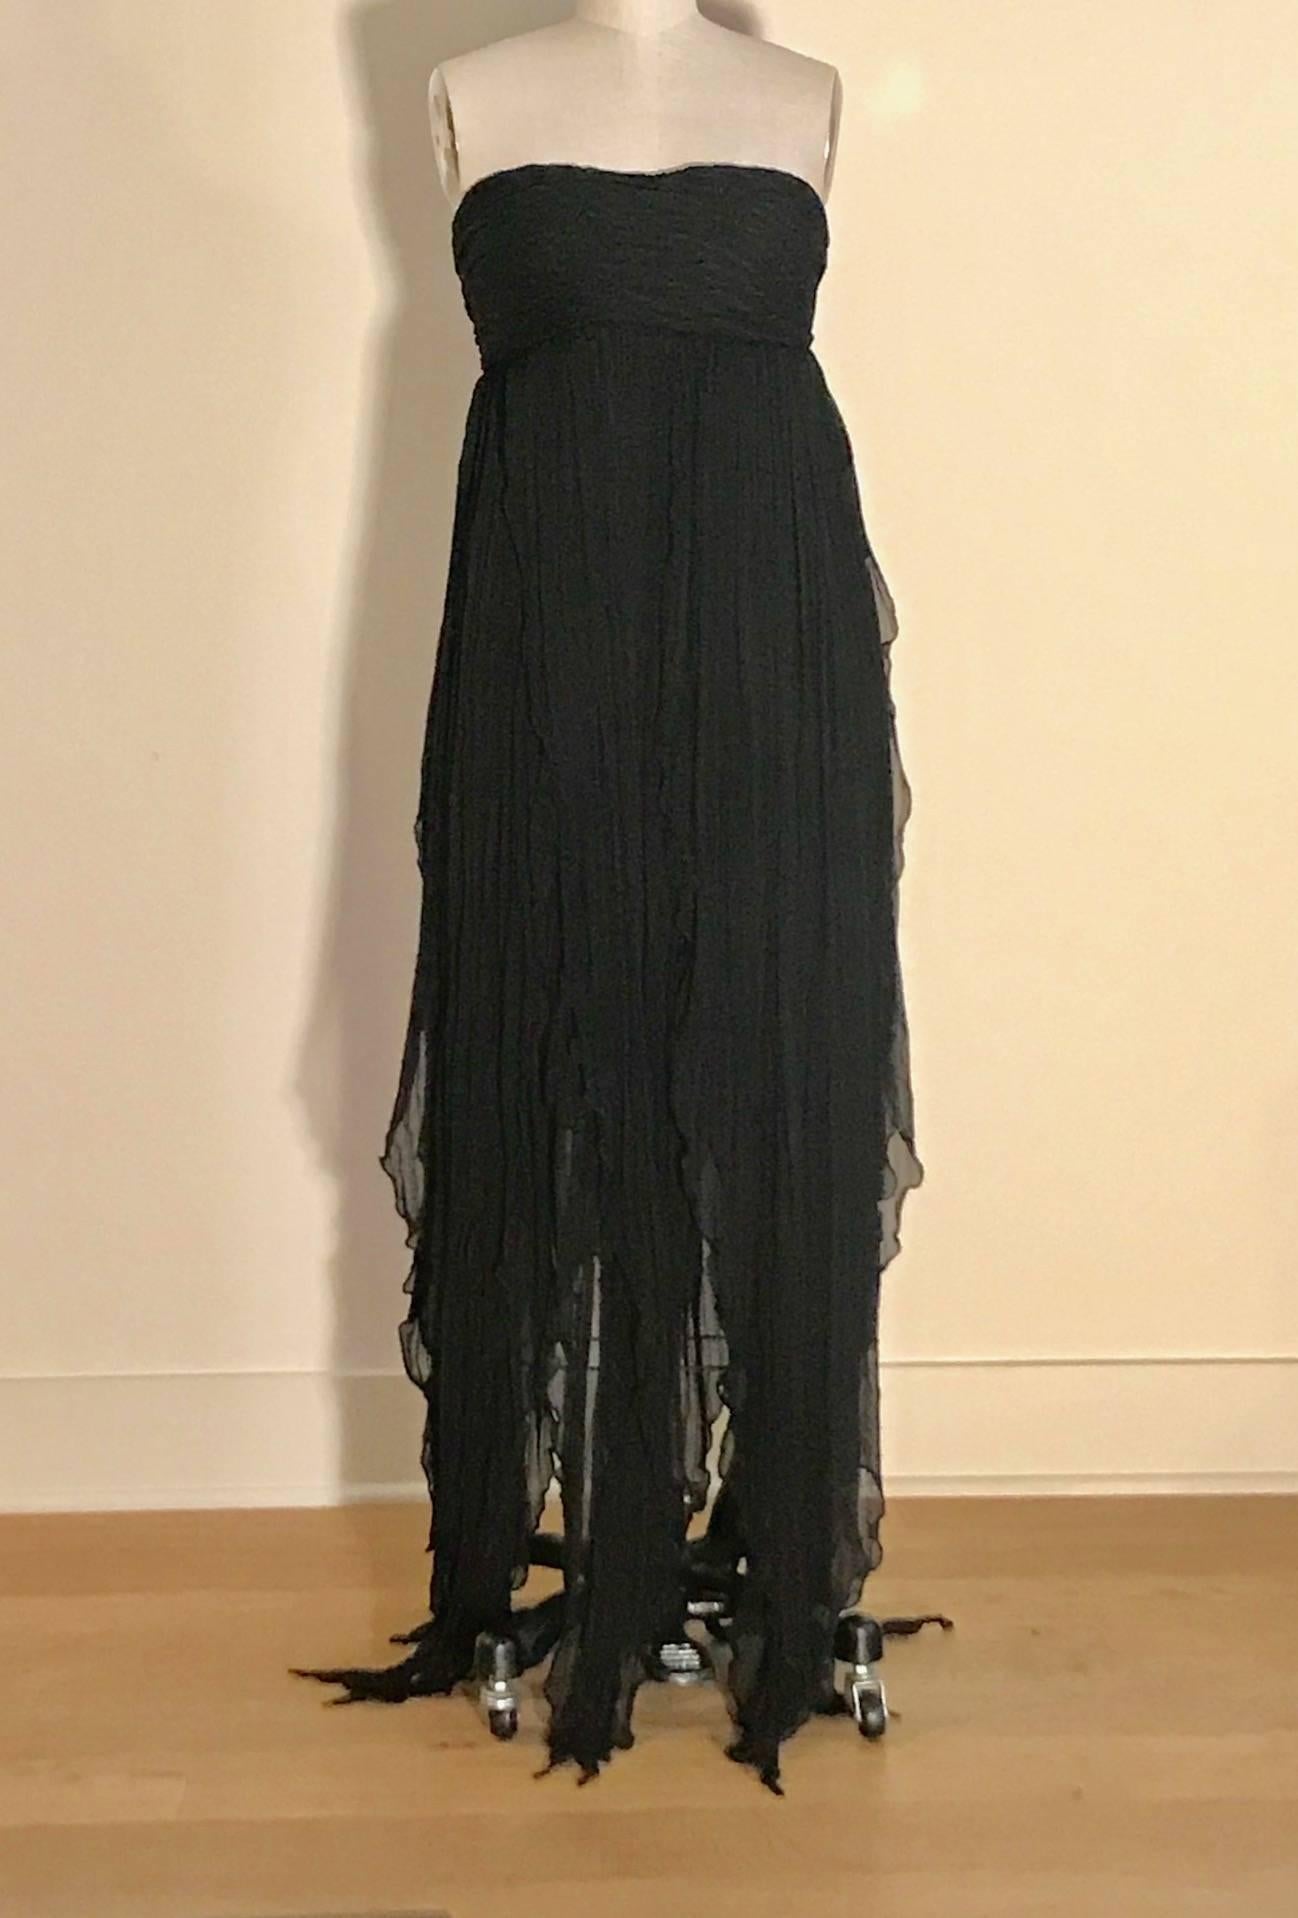 Alexander McQueen black on black stripe crinkled silk chiffon strapless dress. Soft pleats at bust, skirt hangs in separate strips/panels that create beautiful movement. Built in bustier at top. Fastens at back with two hook and eyes brassiere